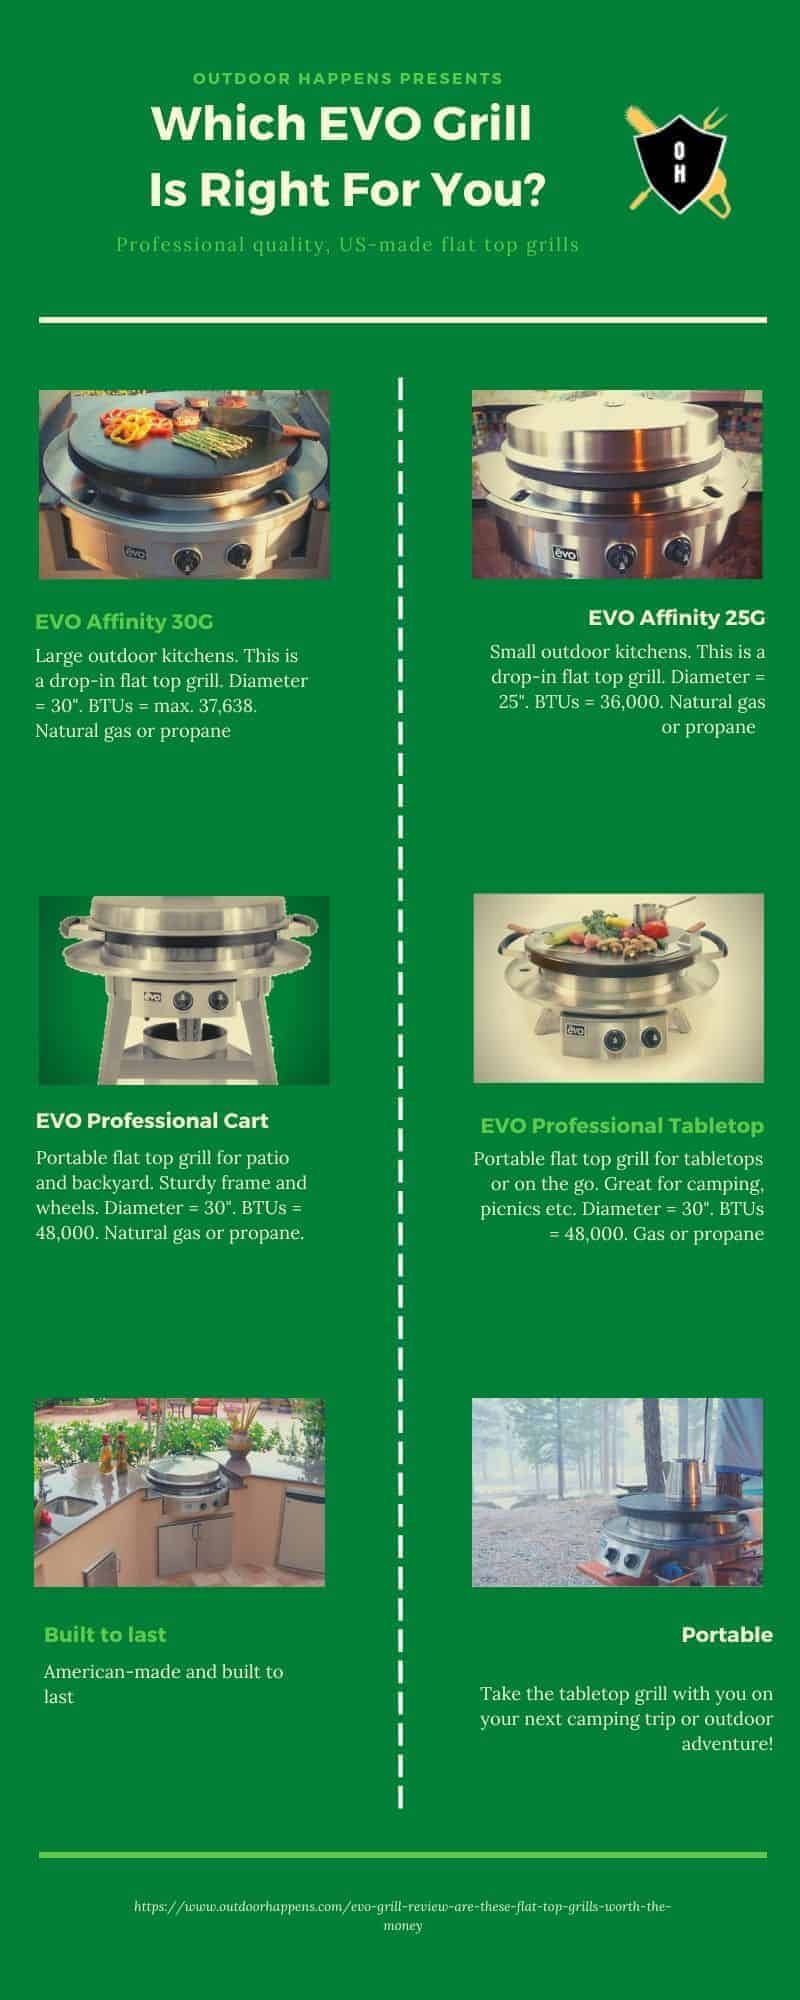 Evo-grill-evo-flat-top-grill-which-one